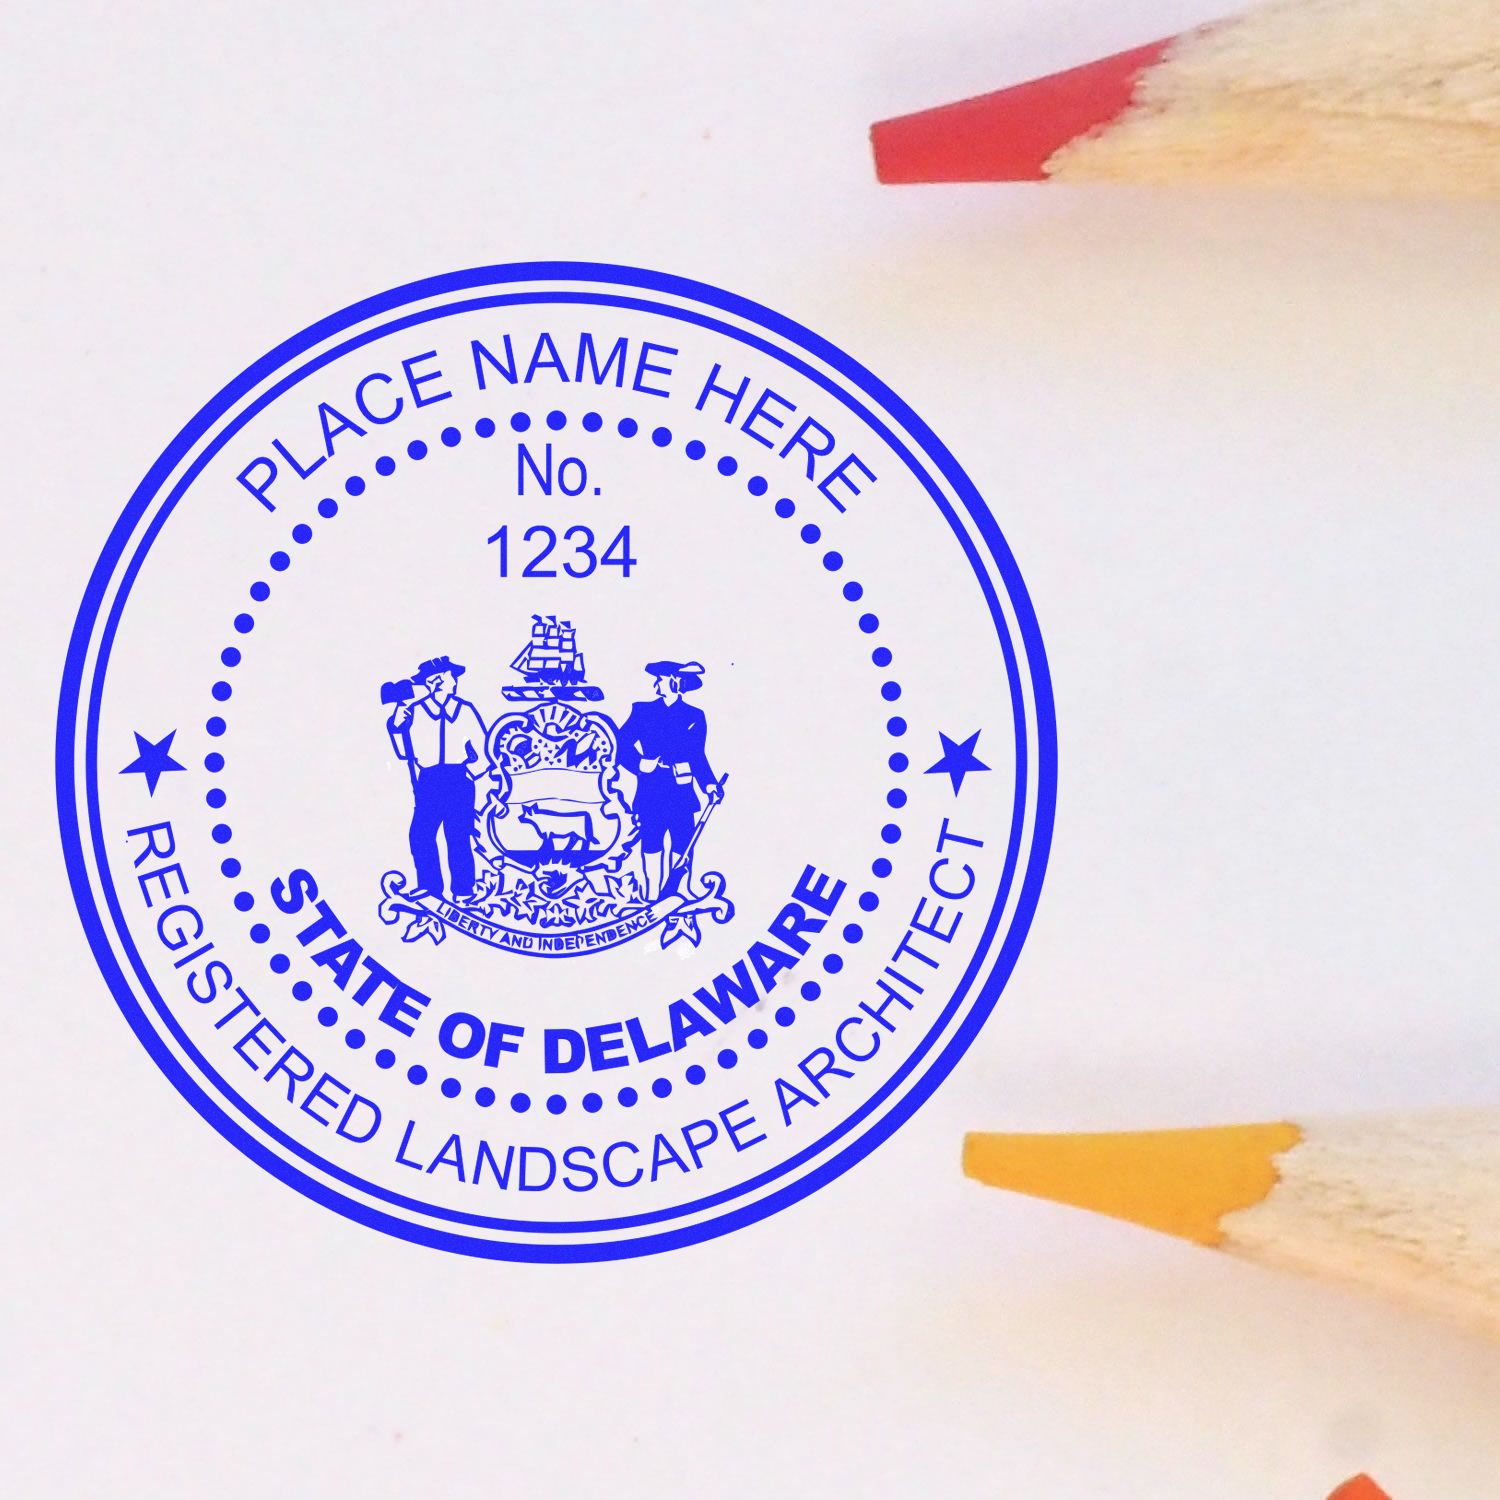 Delaware Landscape Architectural Seal Stamp in use photo showing a stamped imprint of the Delaware Landscape Architectural Seal Stamp